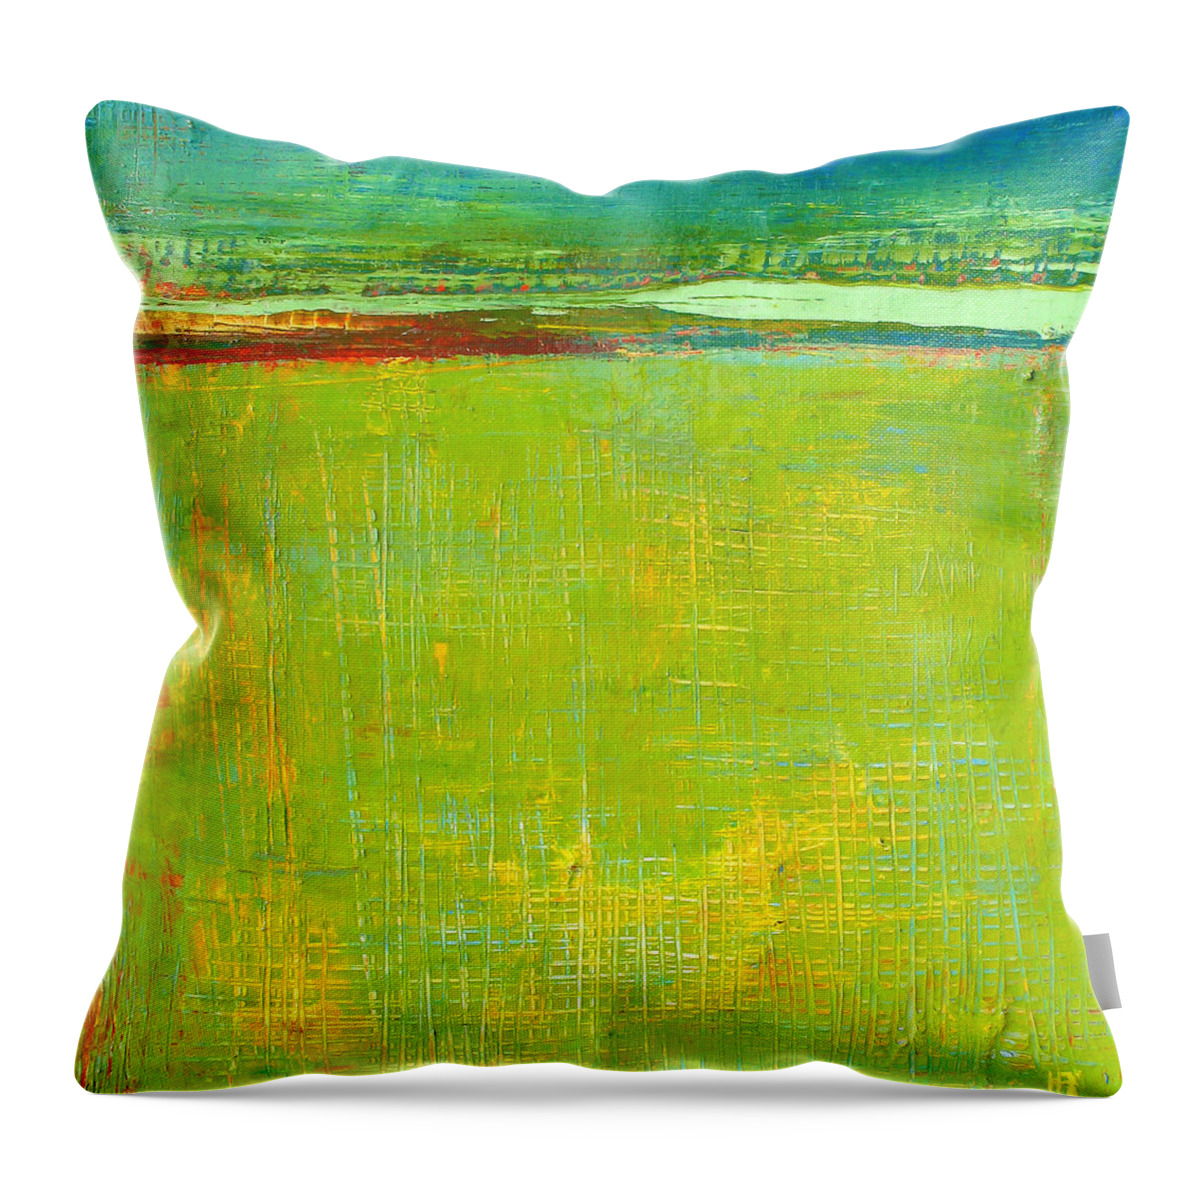 Abstract Landscape In Green Throw Pillow featuring the painting Abstract Landscape In Green by Habib Ayat